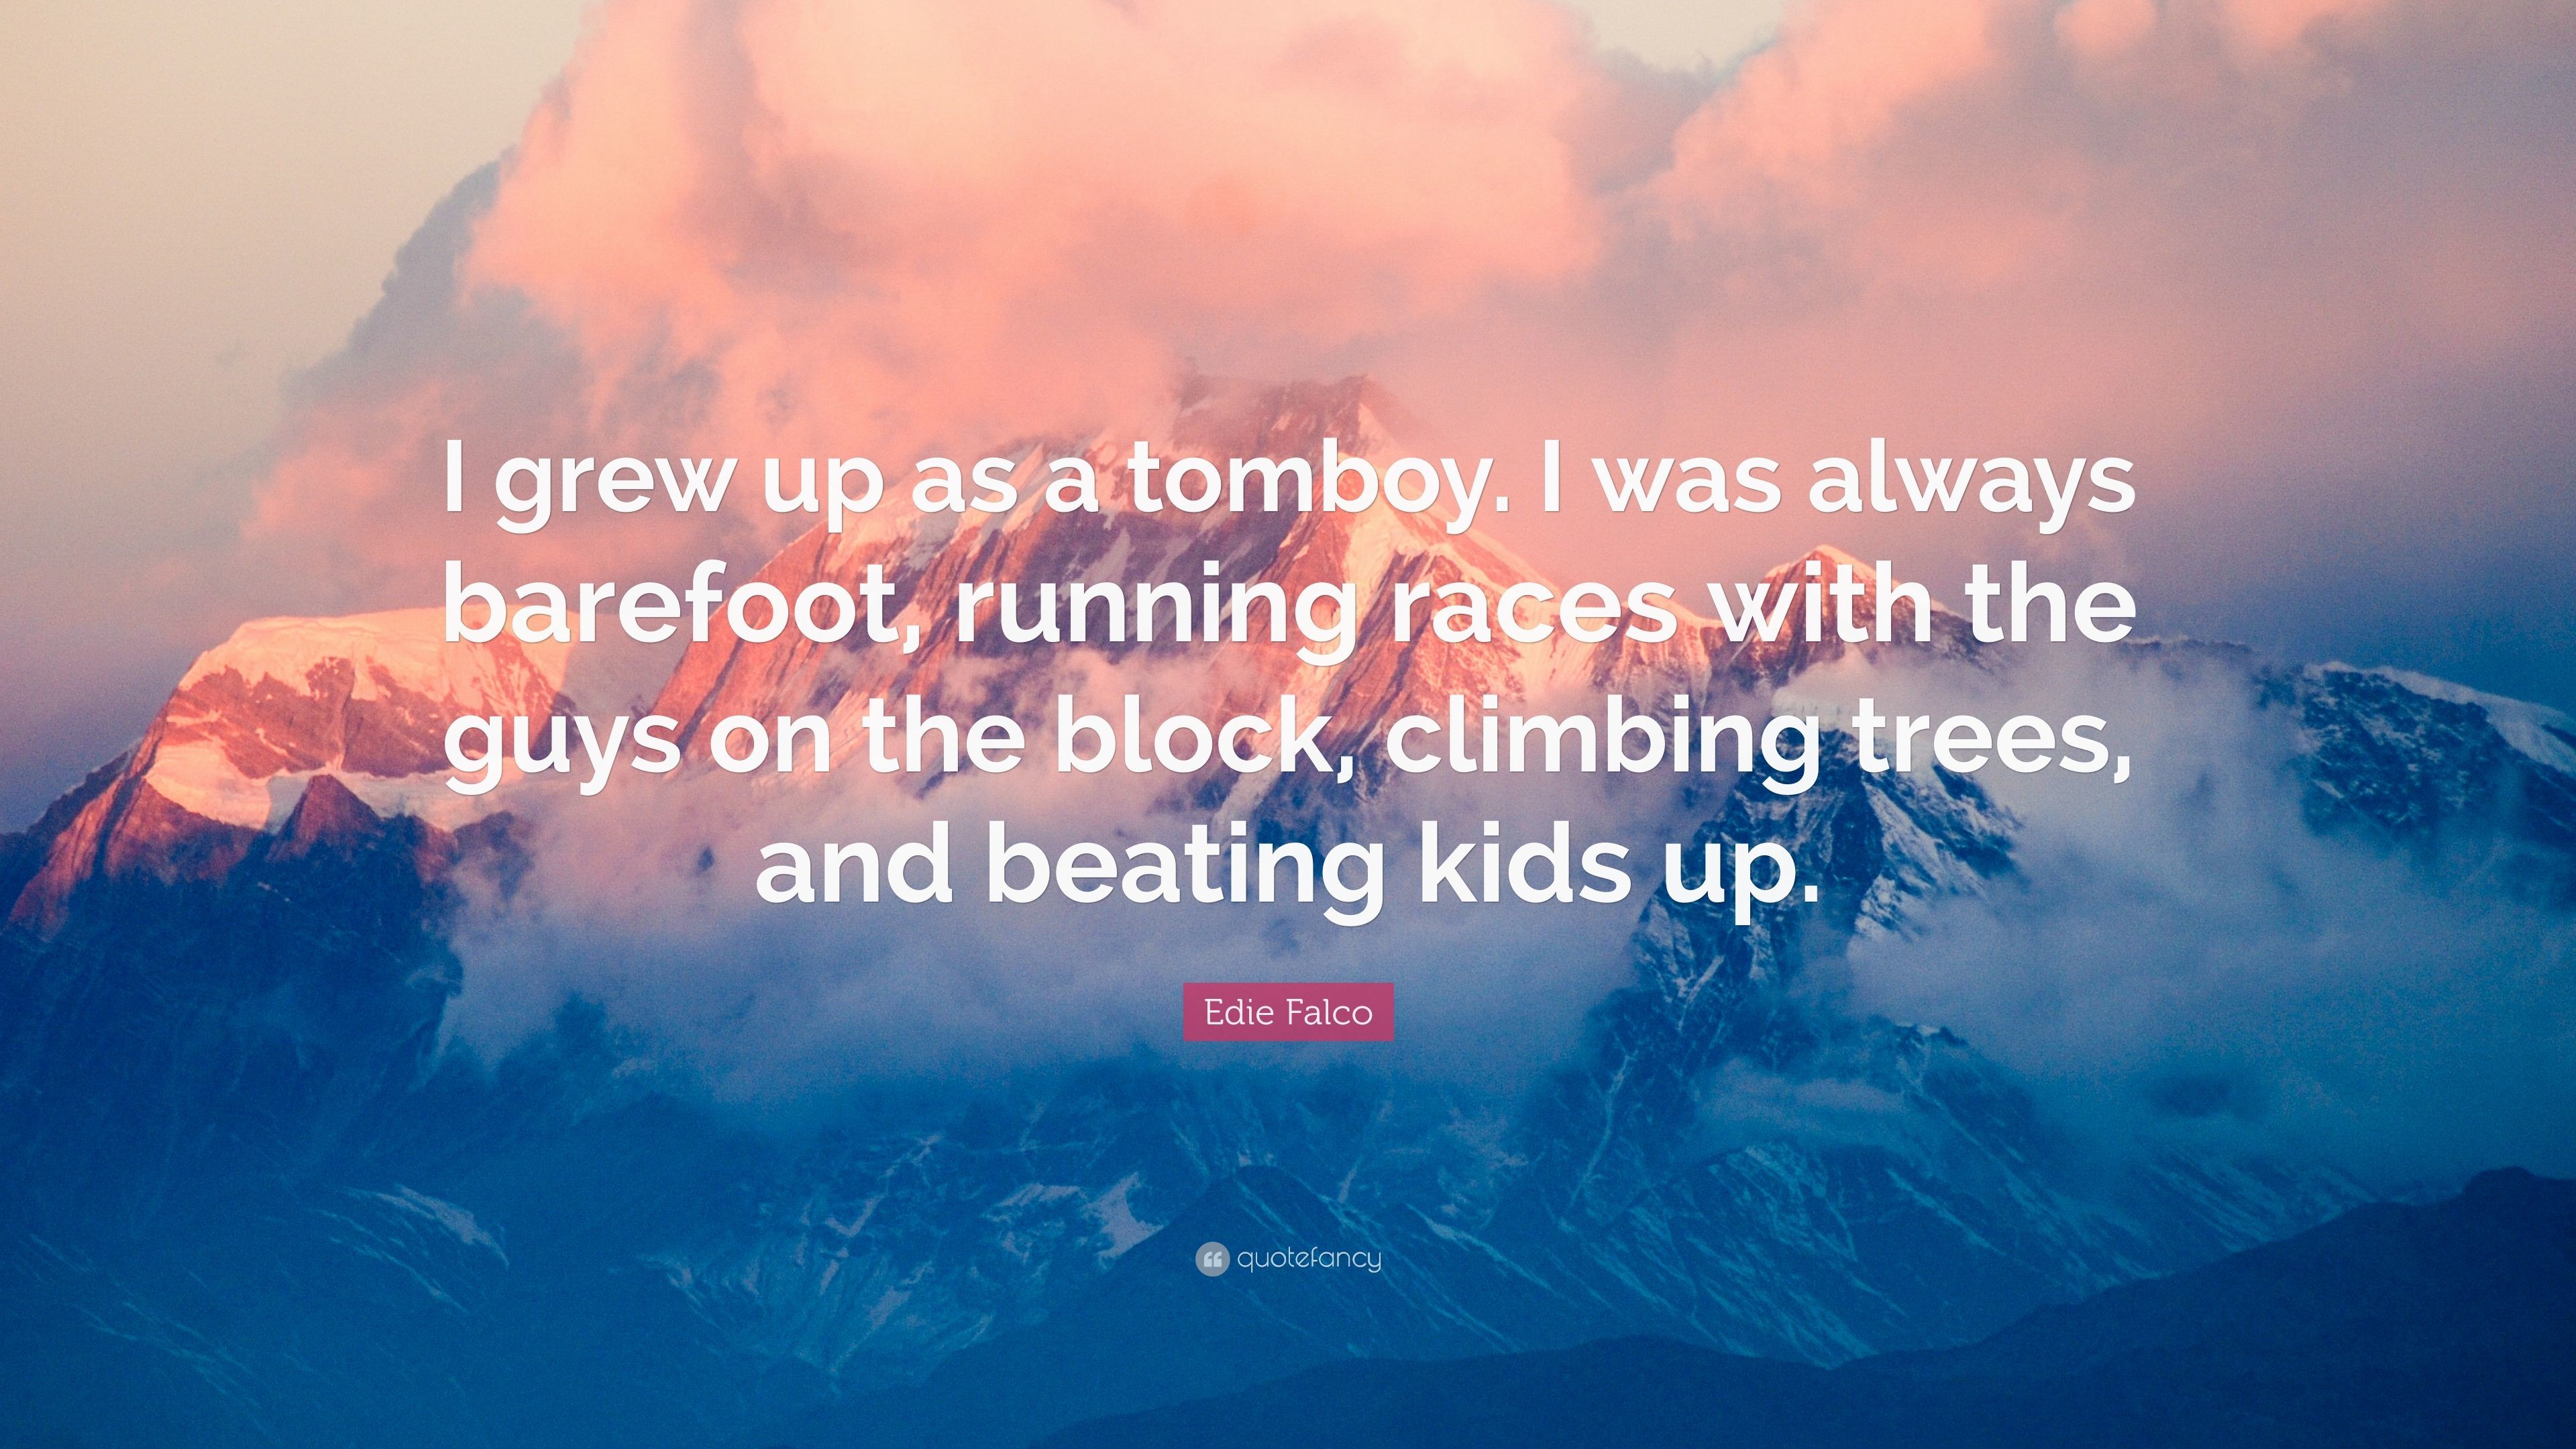 3840x2160 Edie Falco Quote: “I grew up as a tomboy. I was always barefoot